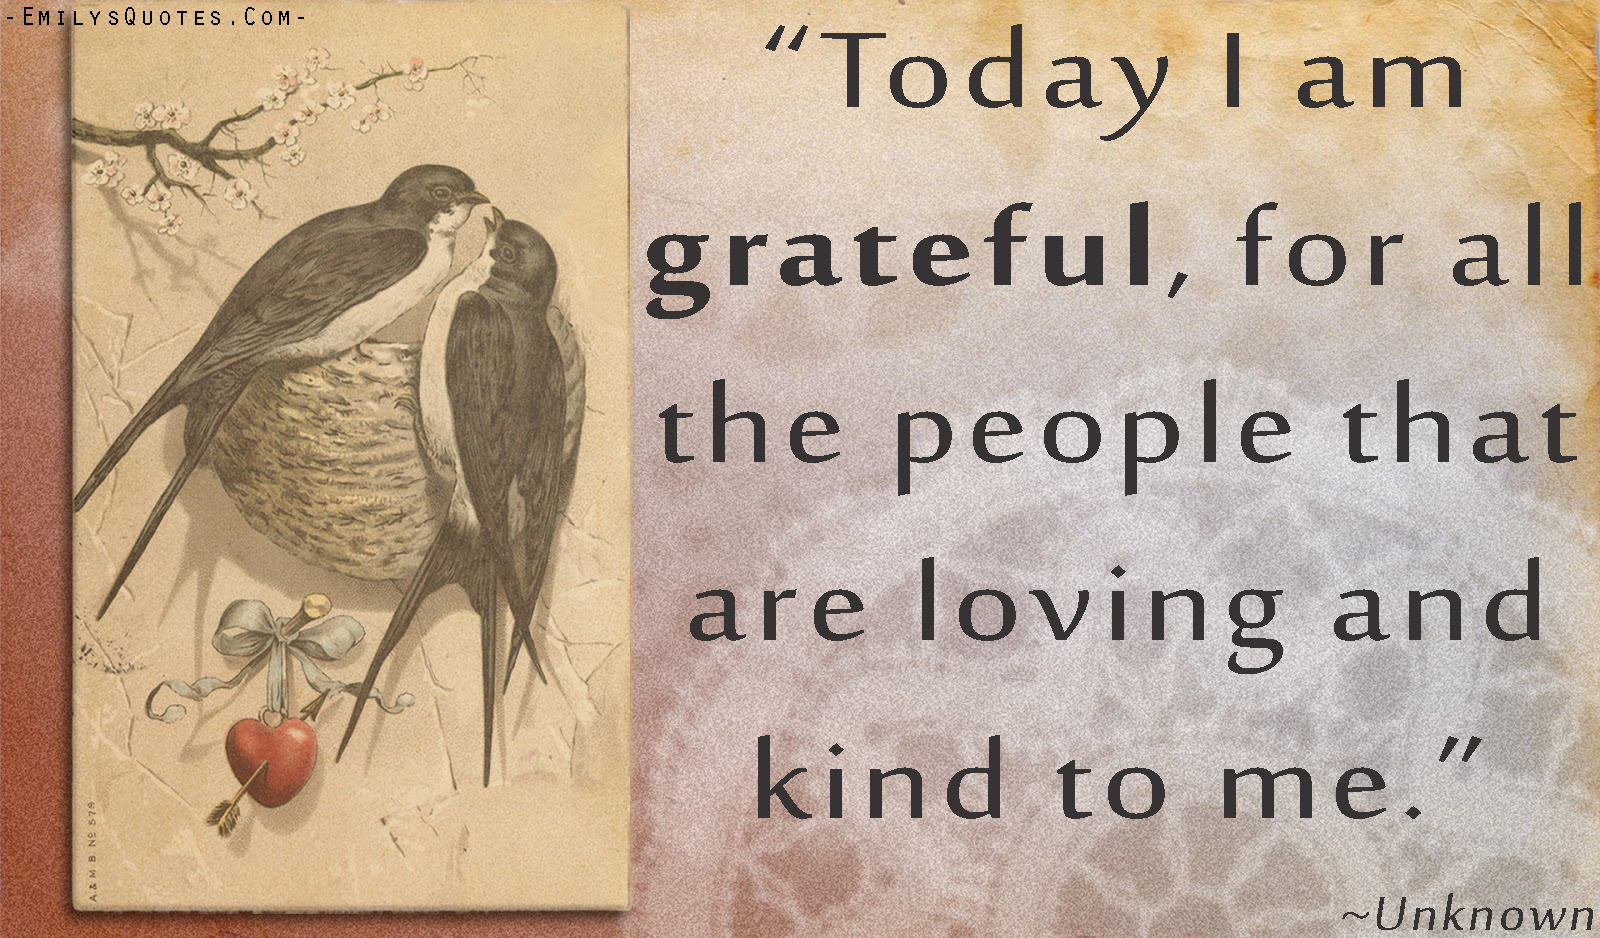 Today I am grateful, for all the people that are loving and kind to me